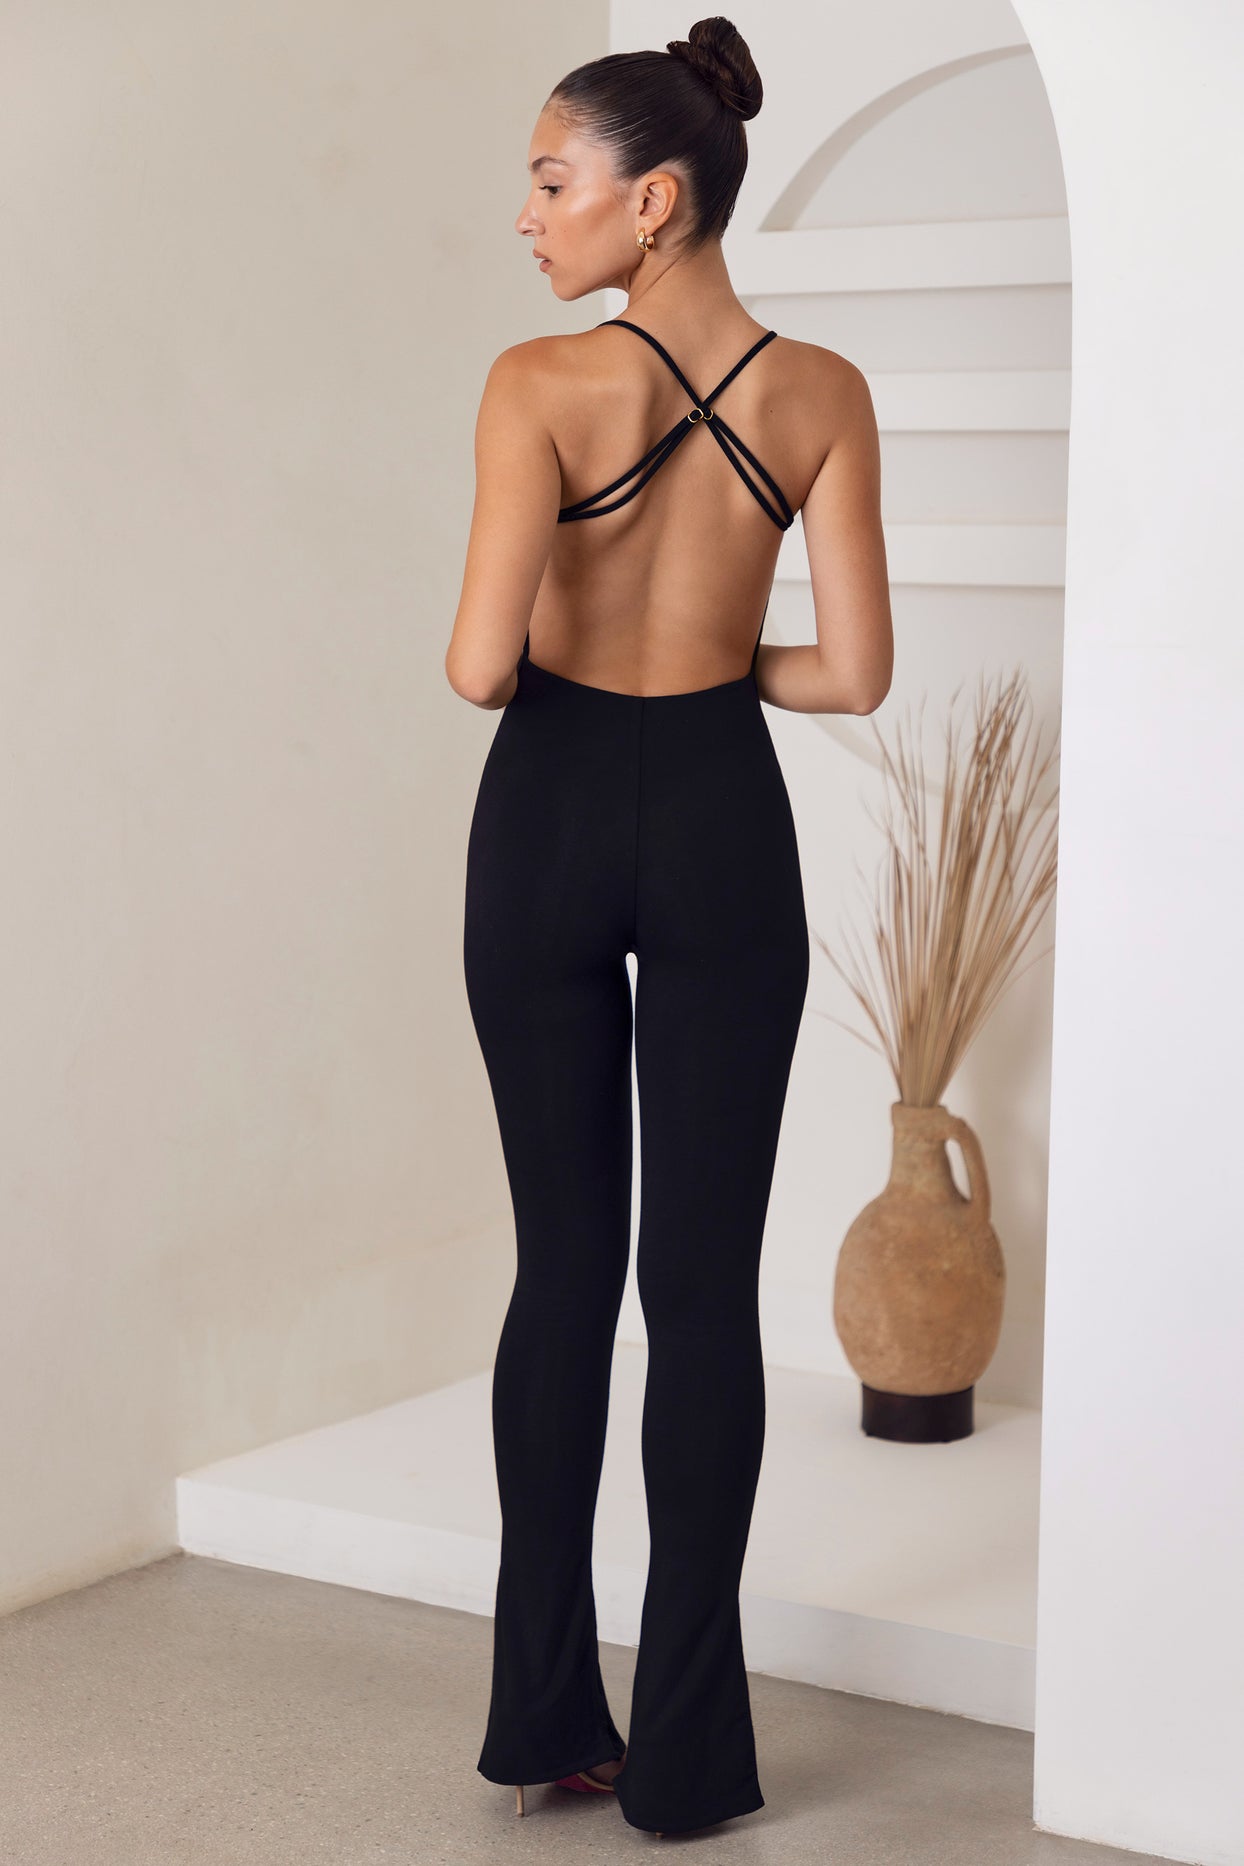 Neoma Petite Scoop Neck Backless Jumpsuit in Black